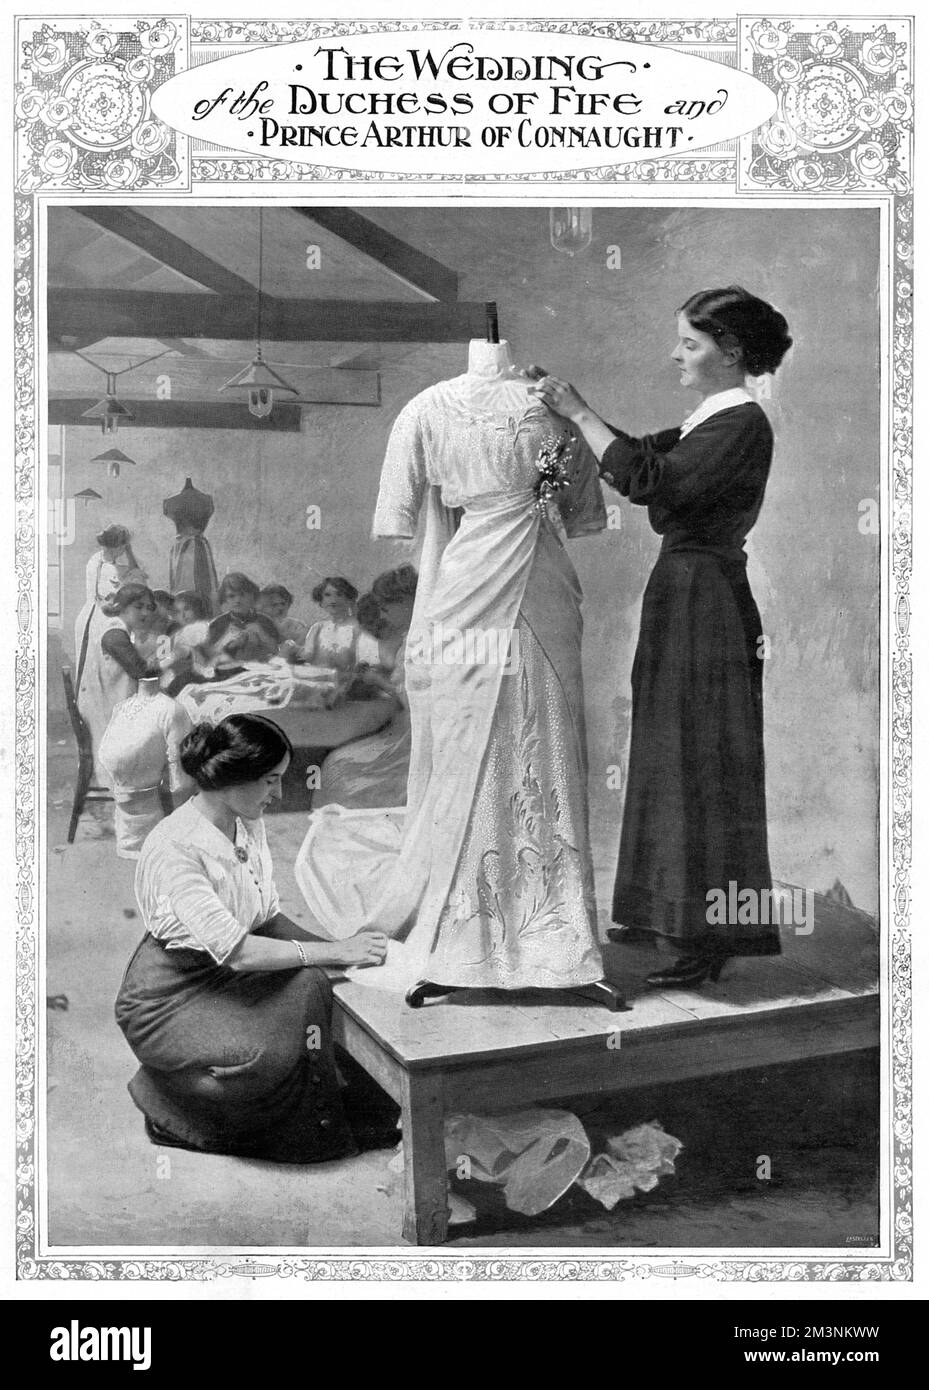 Women in the workshop of Felix Barolet in Knightsbridge, making the wedding dress for the wedding of Arthur, Prince of Connaught and Alexandra, Duchess of Fife, which took place in the Chapel Royal, St James's Palace, London, on 15 October 1913.  In the foreground are two women, working on the dress on a tailor's dummy, on a raised platform.  It was made of white charmeuse satin, with an under dress finely embroidered in leaves and in lilies with pearls, diamante and silver.  In the background several more women are at work, sitting round a table.    October 1913 Stock Photo